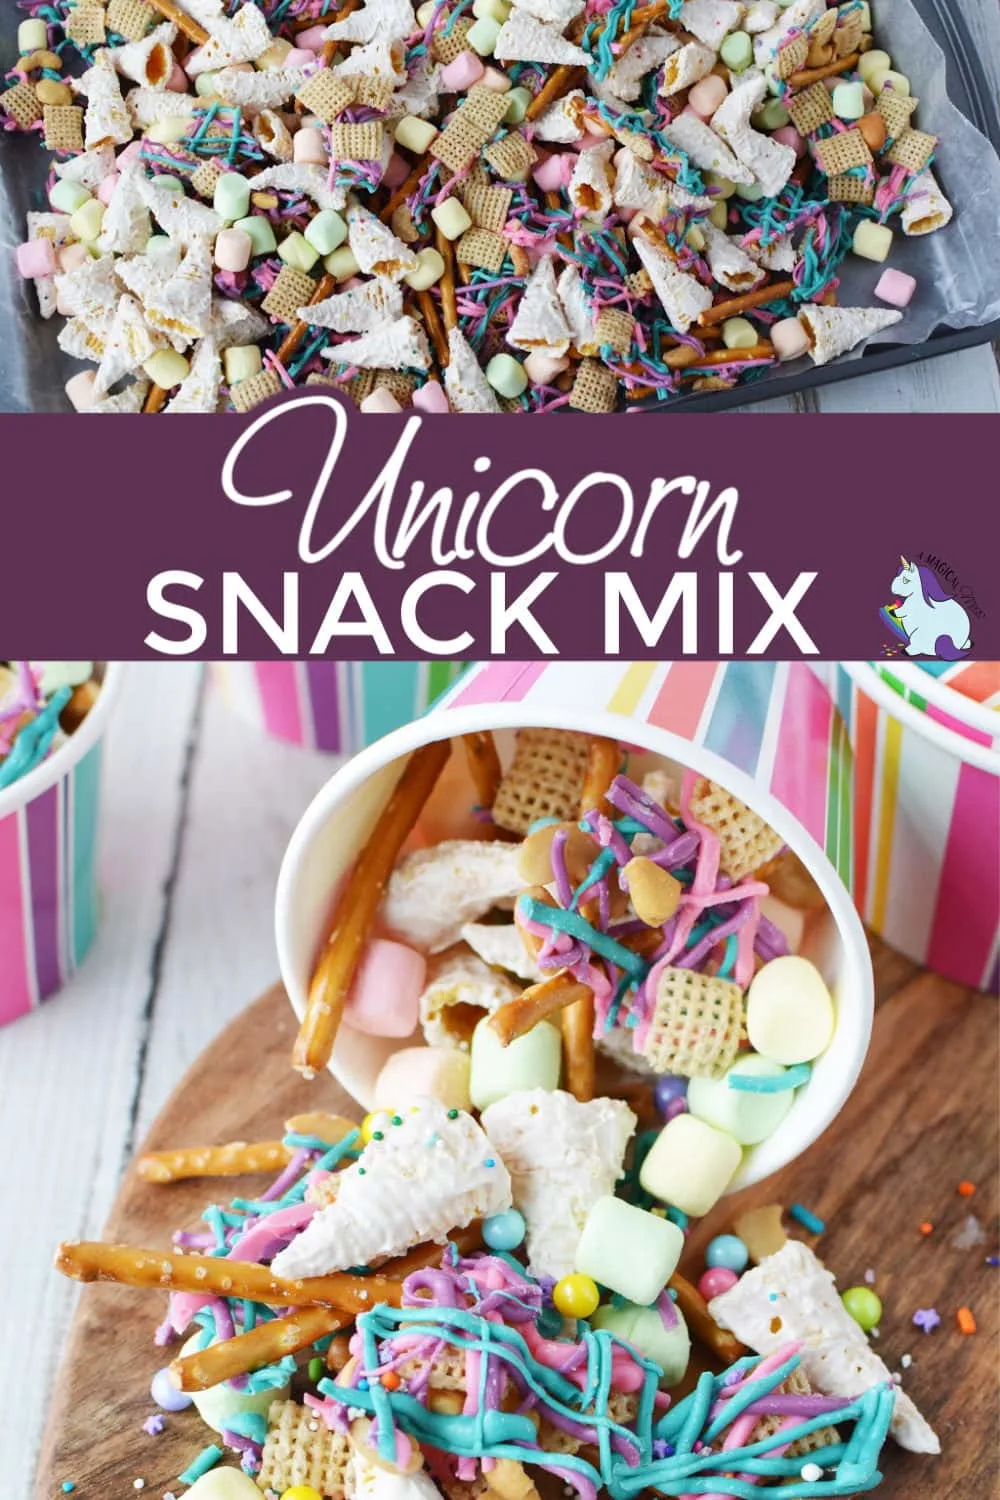 unicorn snack mix spilling out of striped paper cup